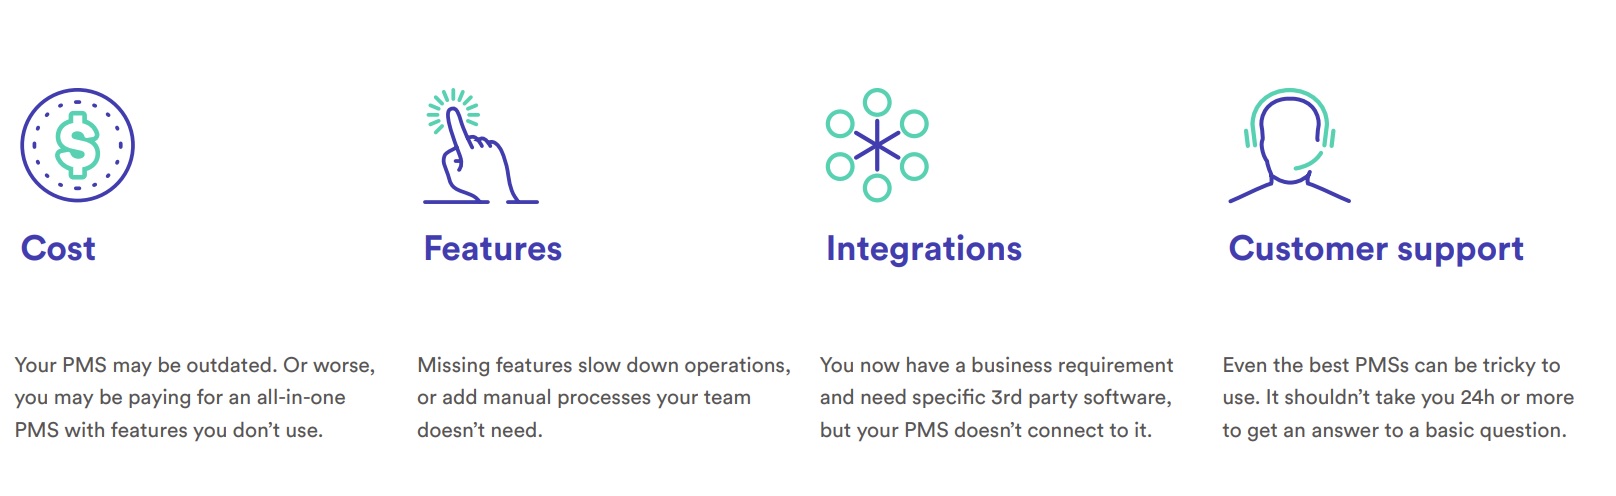 A graphic showing four ways to evaluate a PMS, including cost, features, integration, and customer support